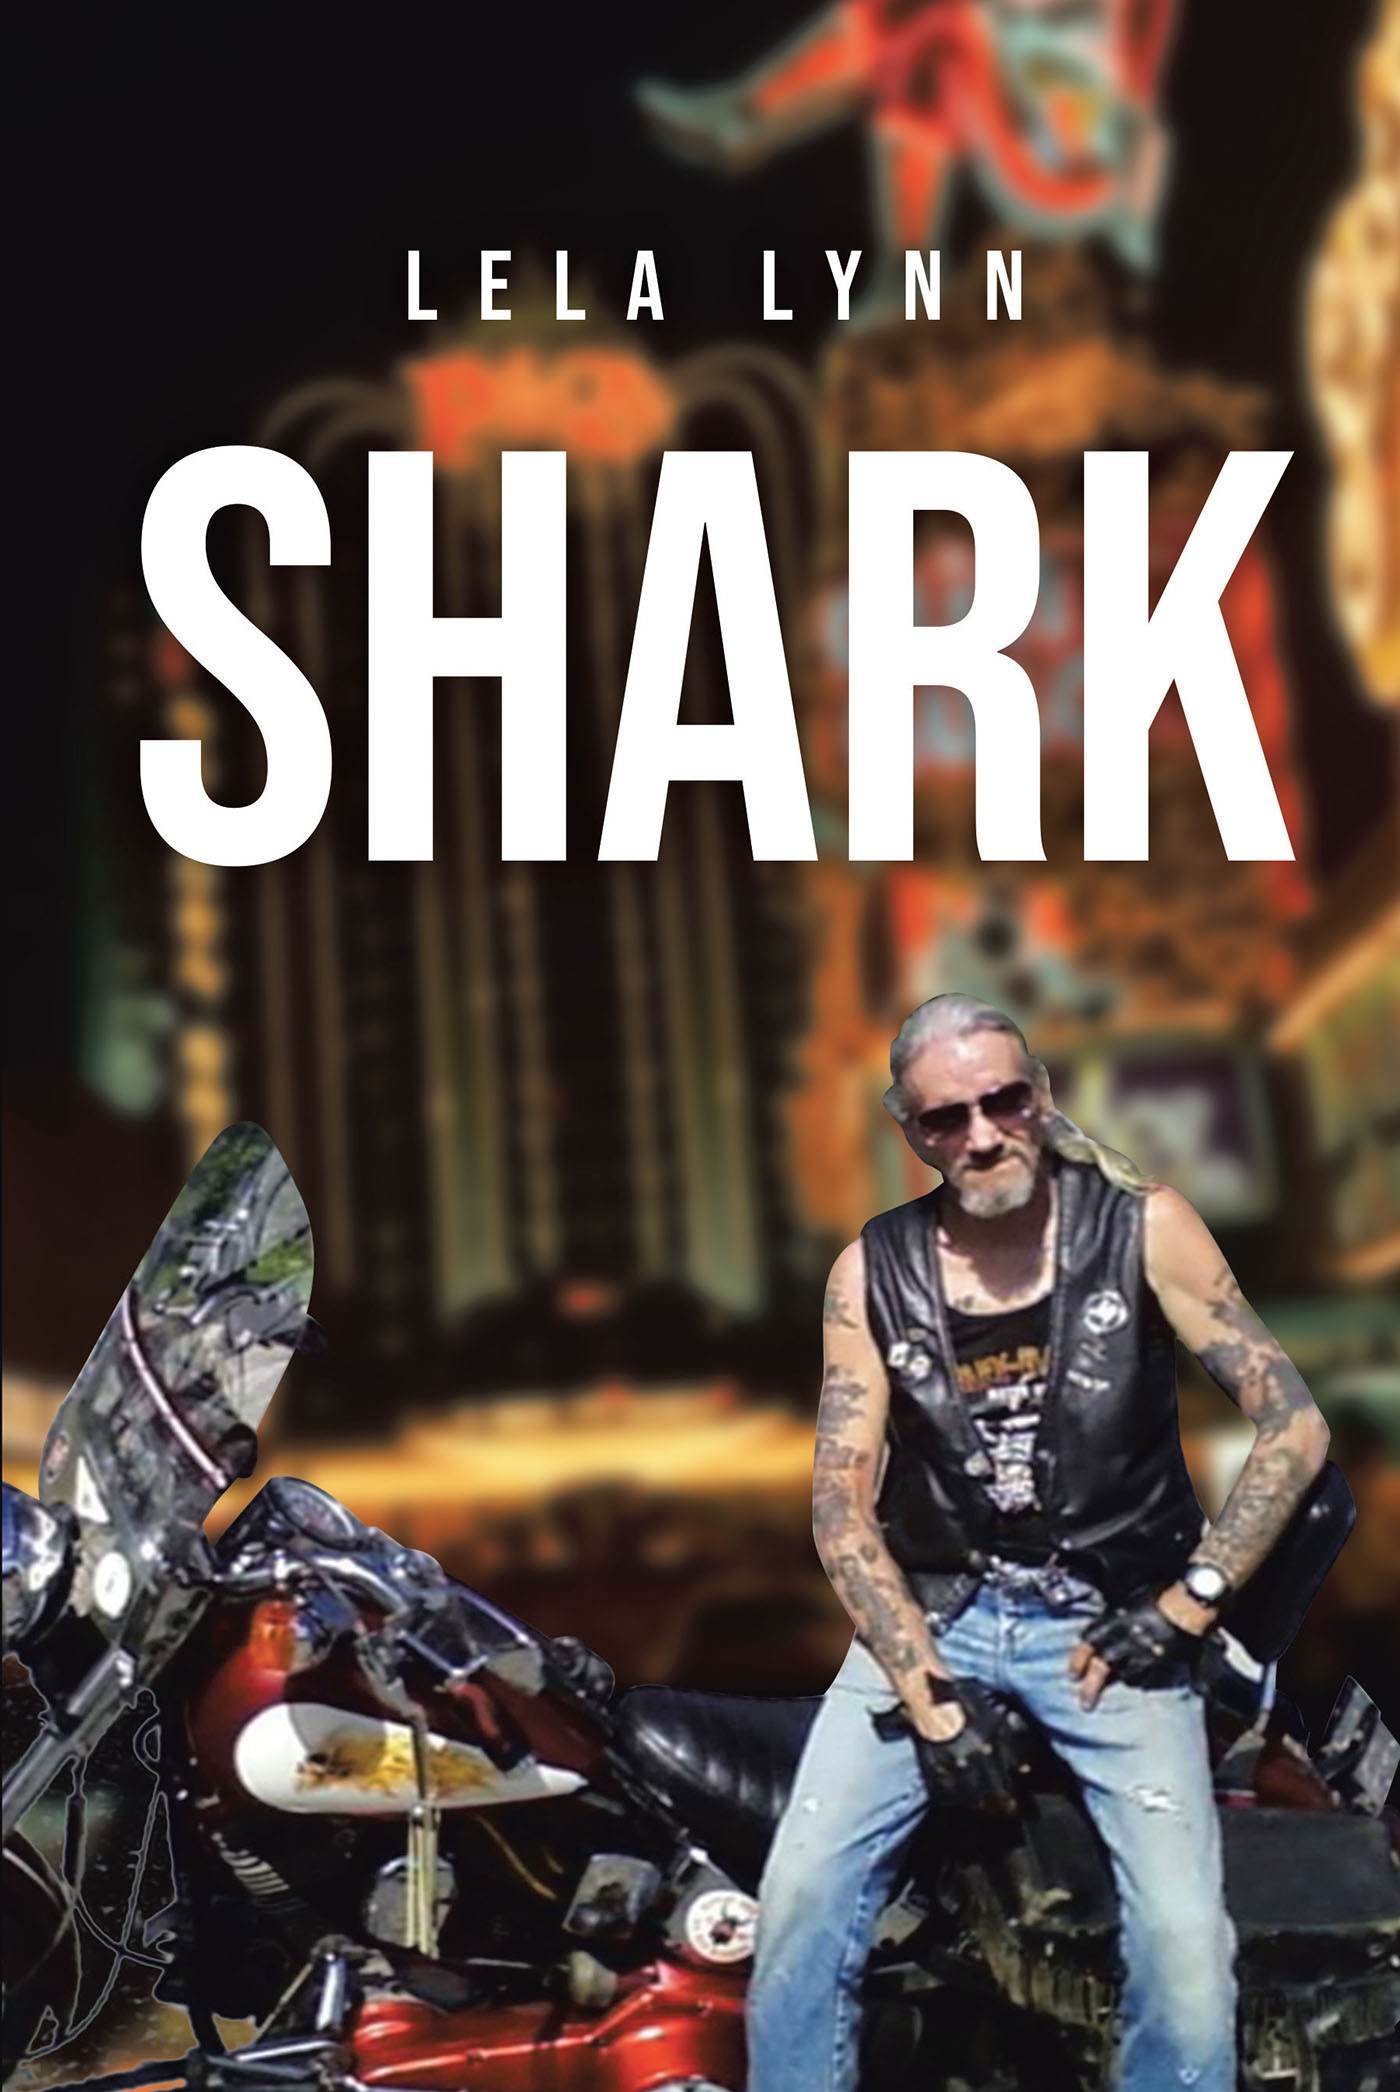 Shark Cover Image